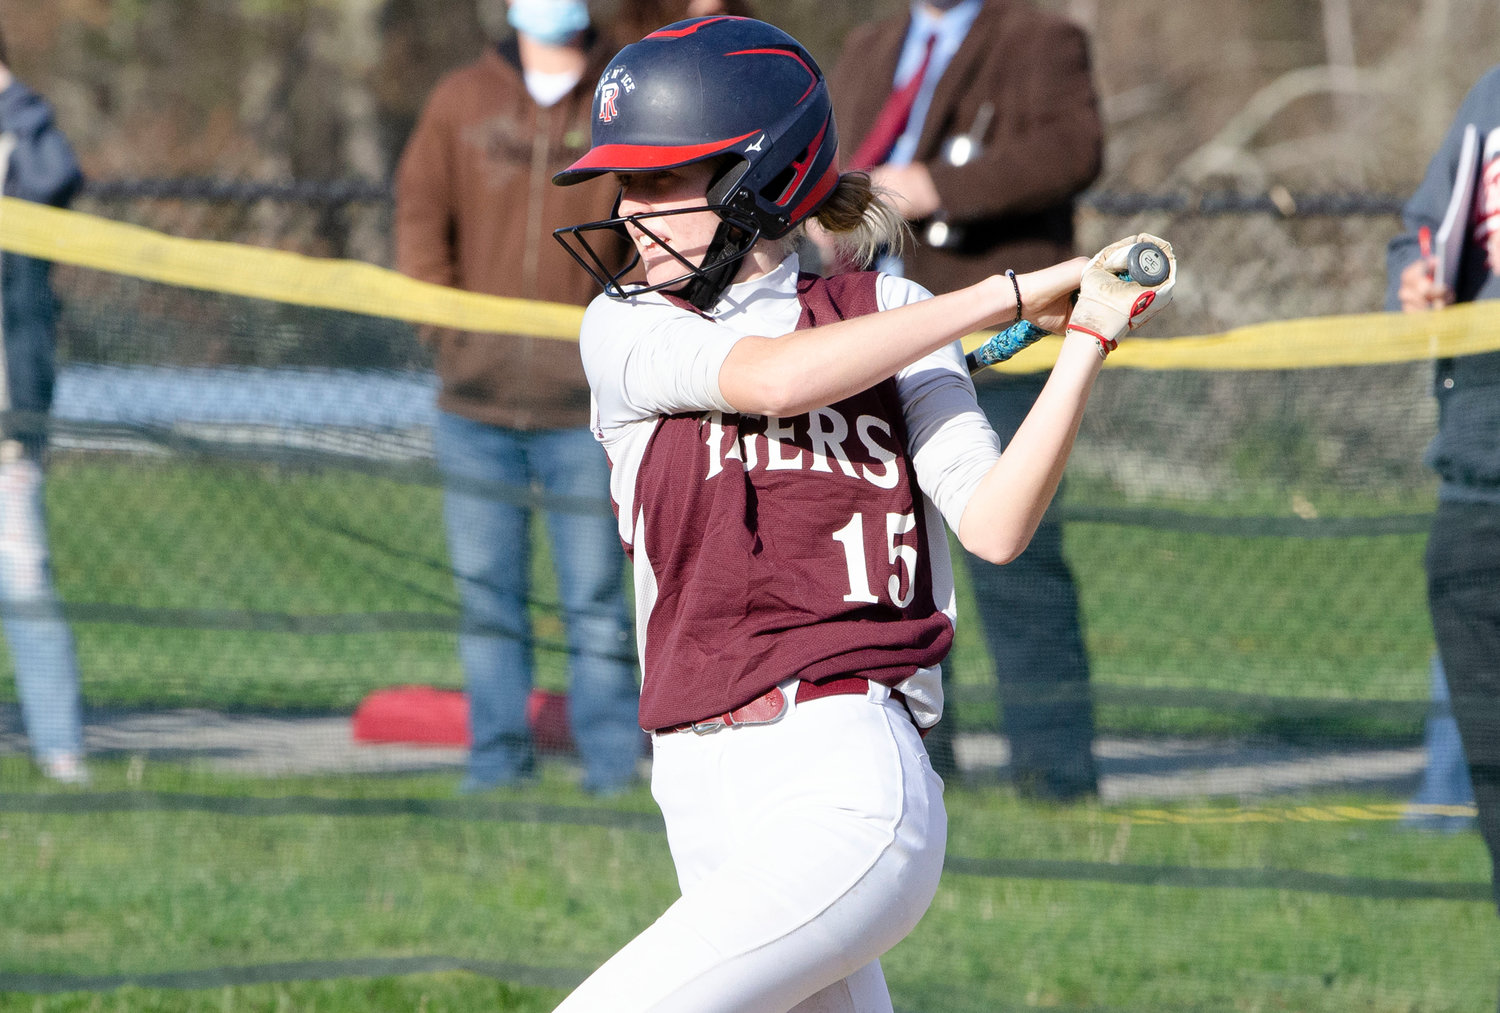 Mackenzie Kiley and the Tigers bashed 21 hits against Cranston East. But managed just one hit against West Warwick.